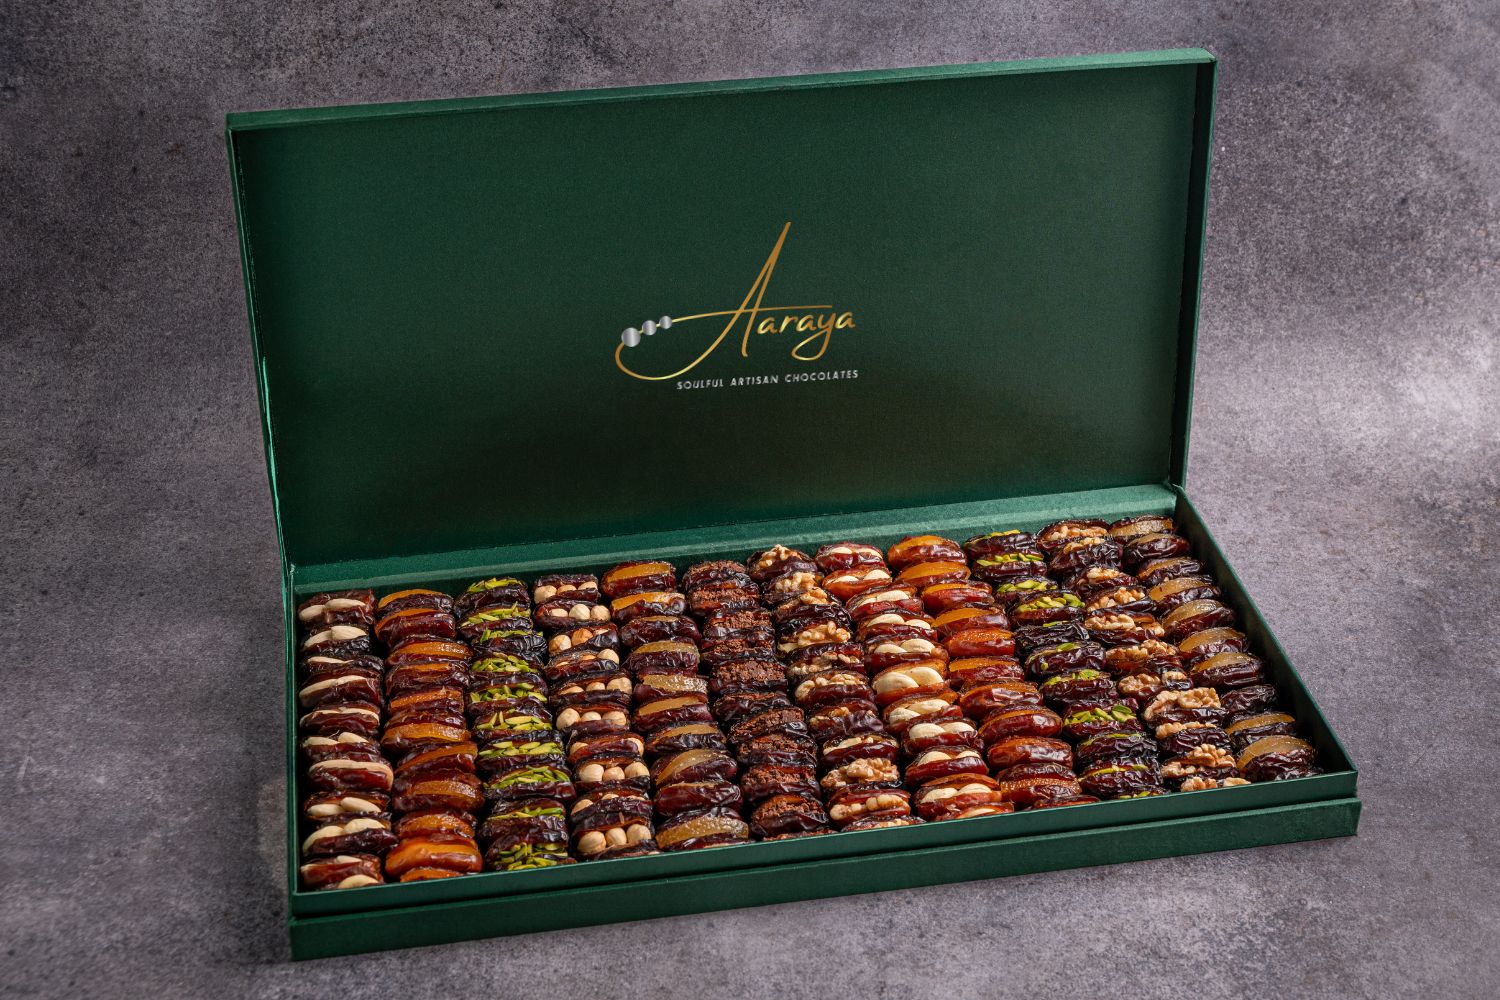 An exquisite assortment of Assorted Luxury Dates by Aaraya Chocolates, showcasing a symphony of premium flavors including Lemon Peel, Pistachio, Orange Peel, Cashew Nut, Salted Hazelnut, Feuilletine Crunch, Walnut, Almond Blanched, and Pistachio Ganache. Each date is a masterpiece of indulgence, promising a sensory journey through the finest gourmet fillings.